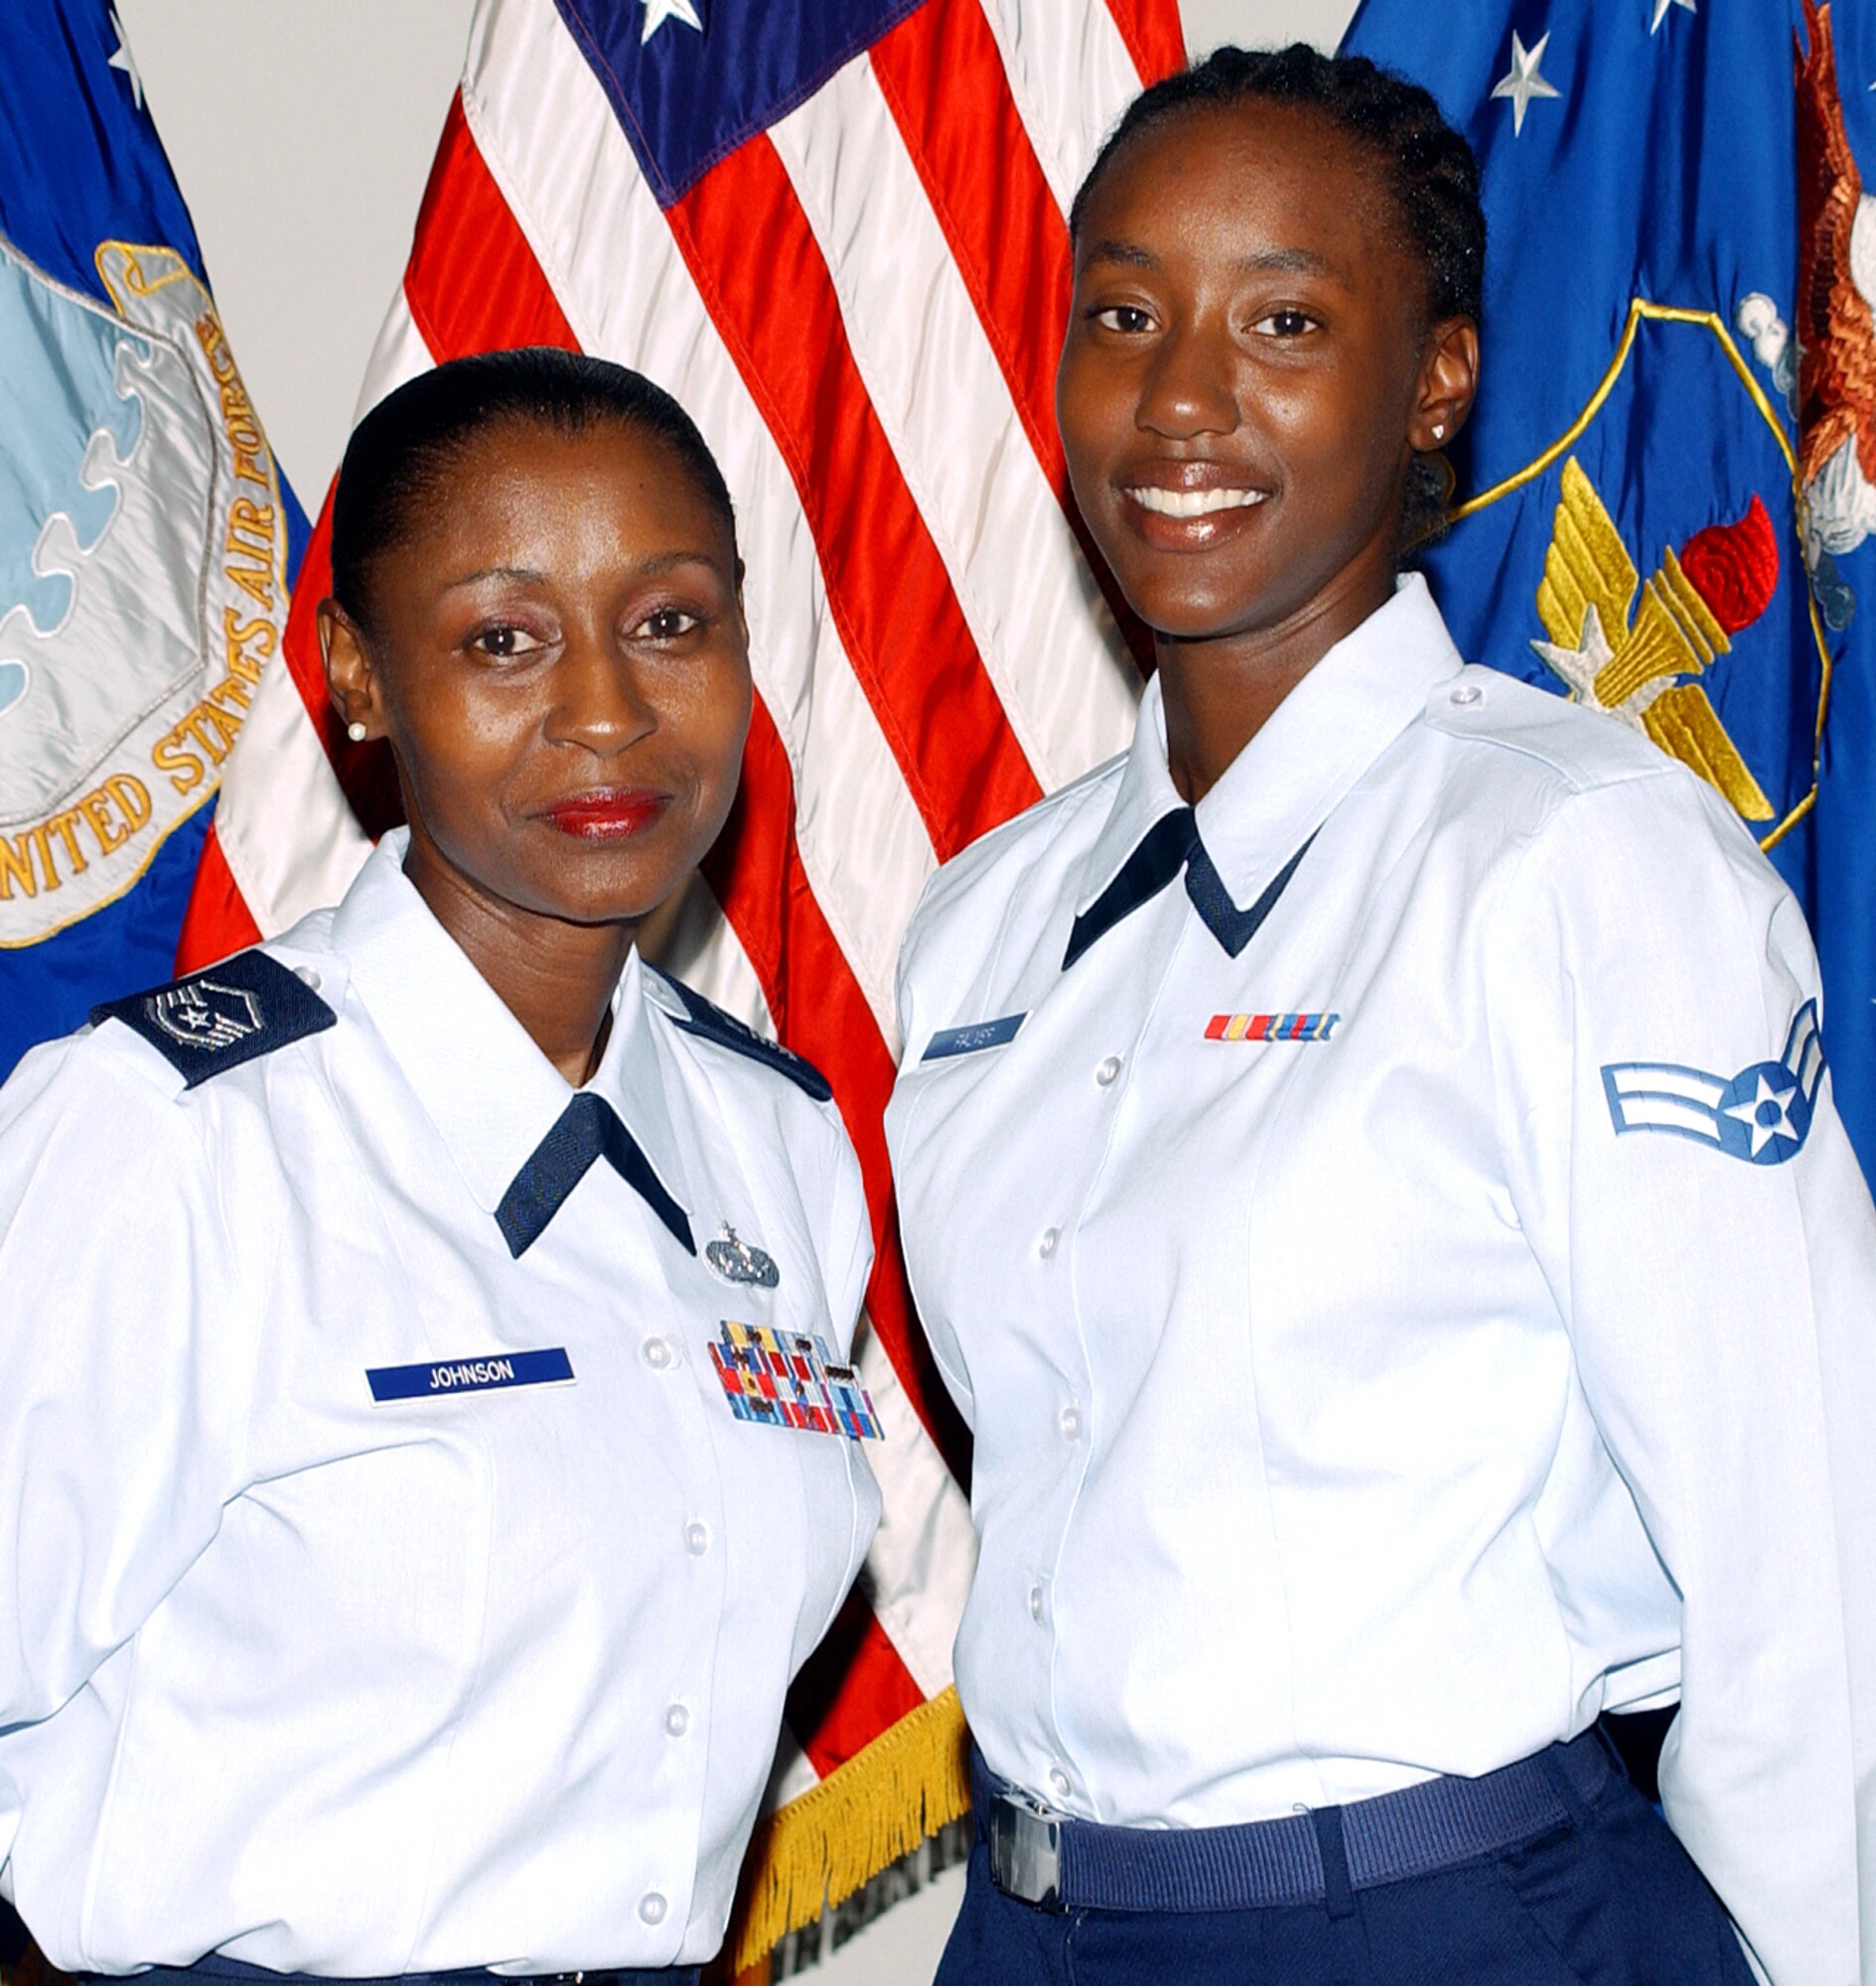 RANDOLPH AIR FORCE BASE, Texas (AFPN) -- Master Sgt. Sharita Johnson (left) and her daughter, Airman 1st Class Kareema Palmer-Johnson, were promoted together Aug. 1. (U.S. Air Force photo by Joel Martinez)